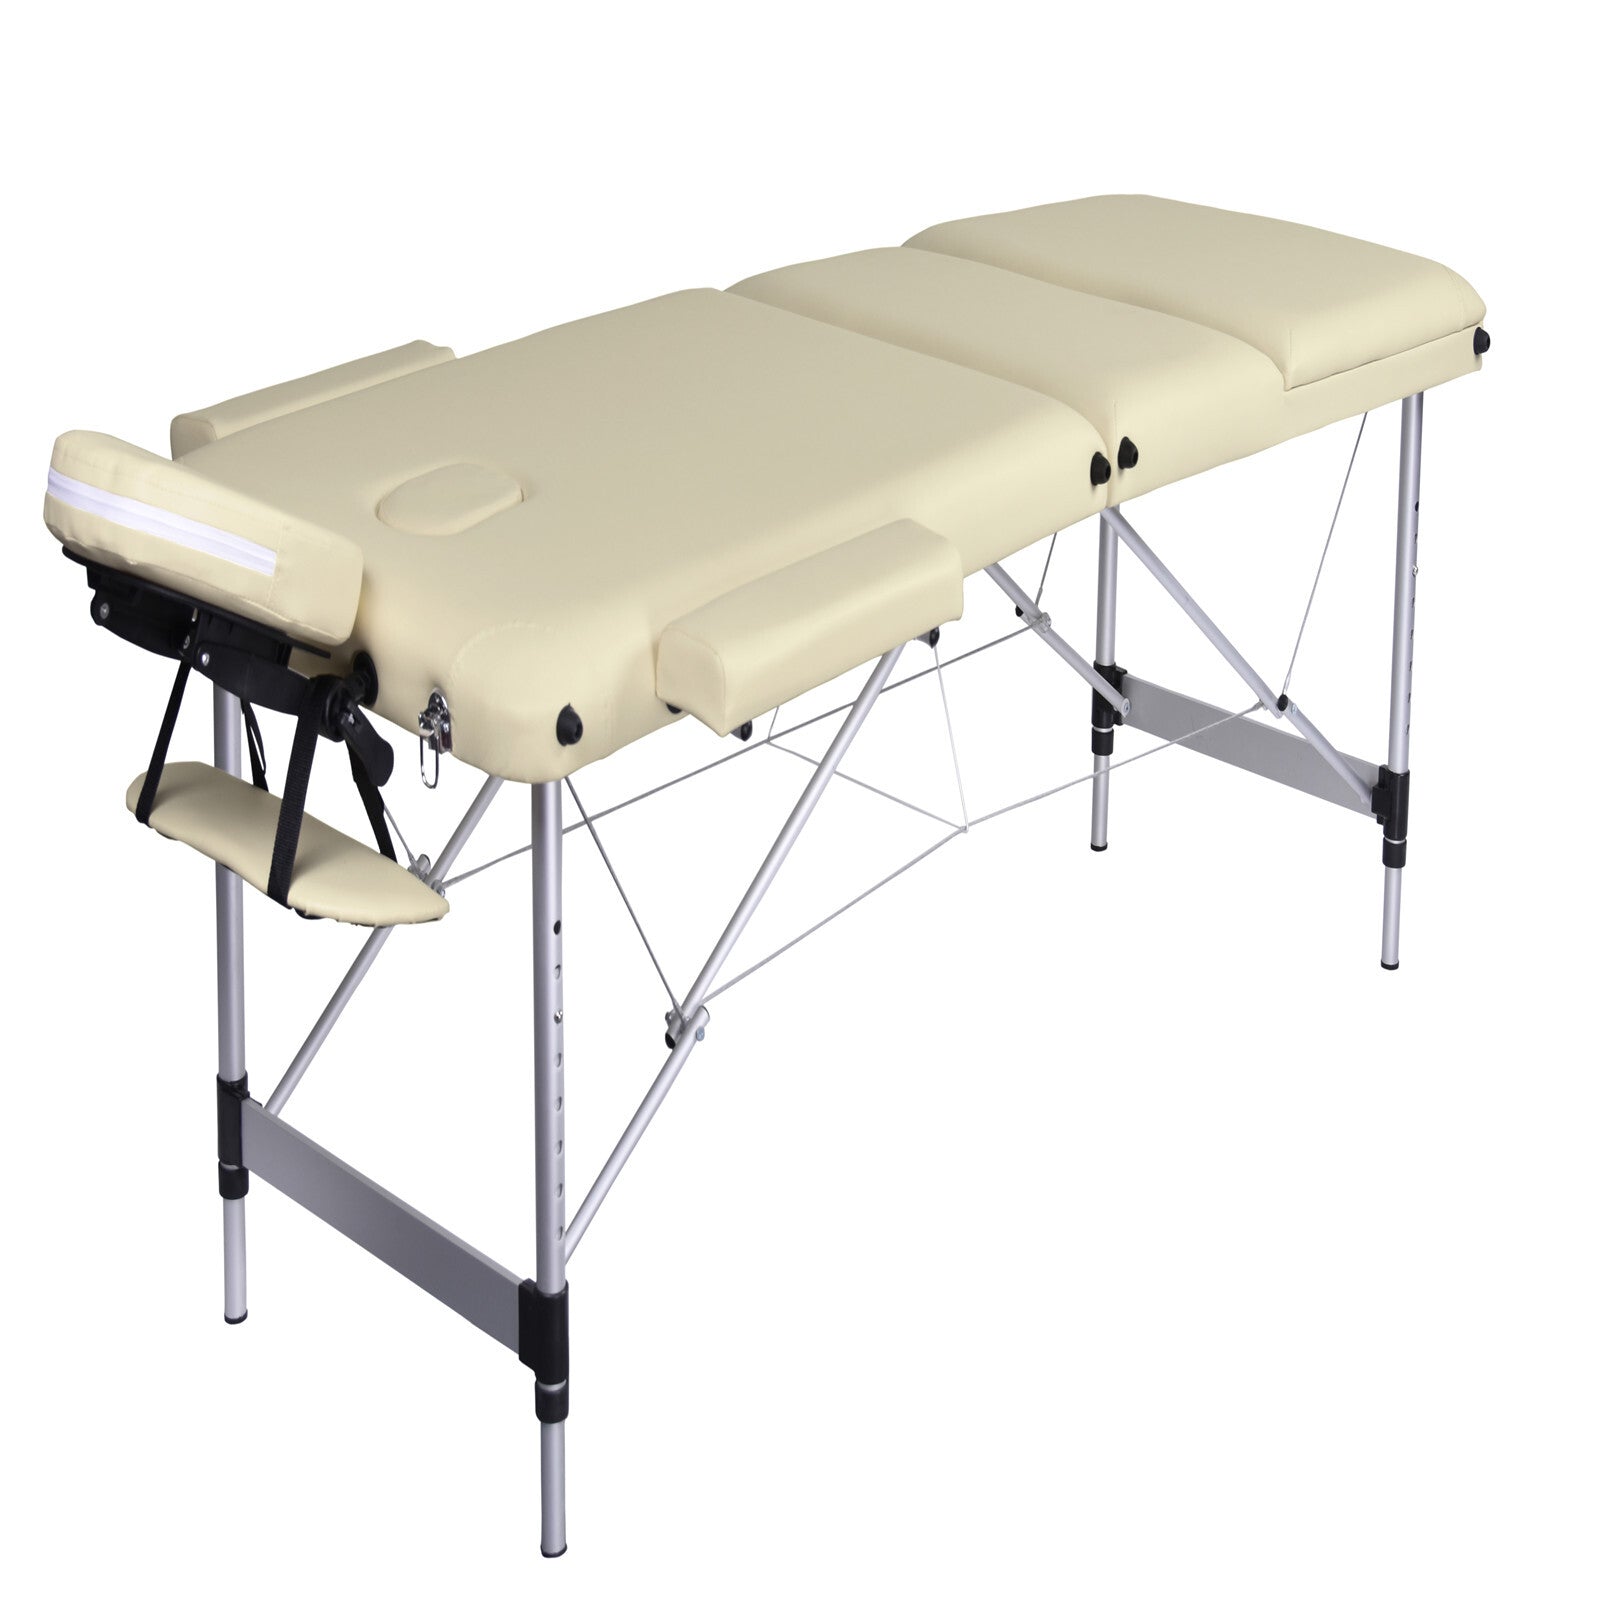 3 Fold Portable Aluminium Massage Table Massage Bed Beauty Therapy Beige - SILBERSHELL